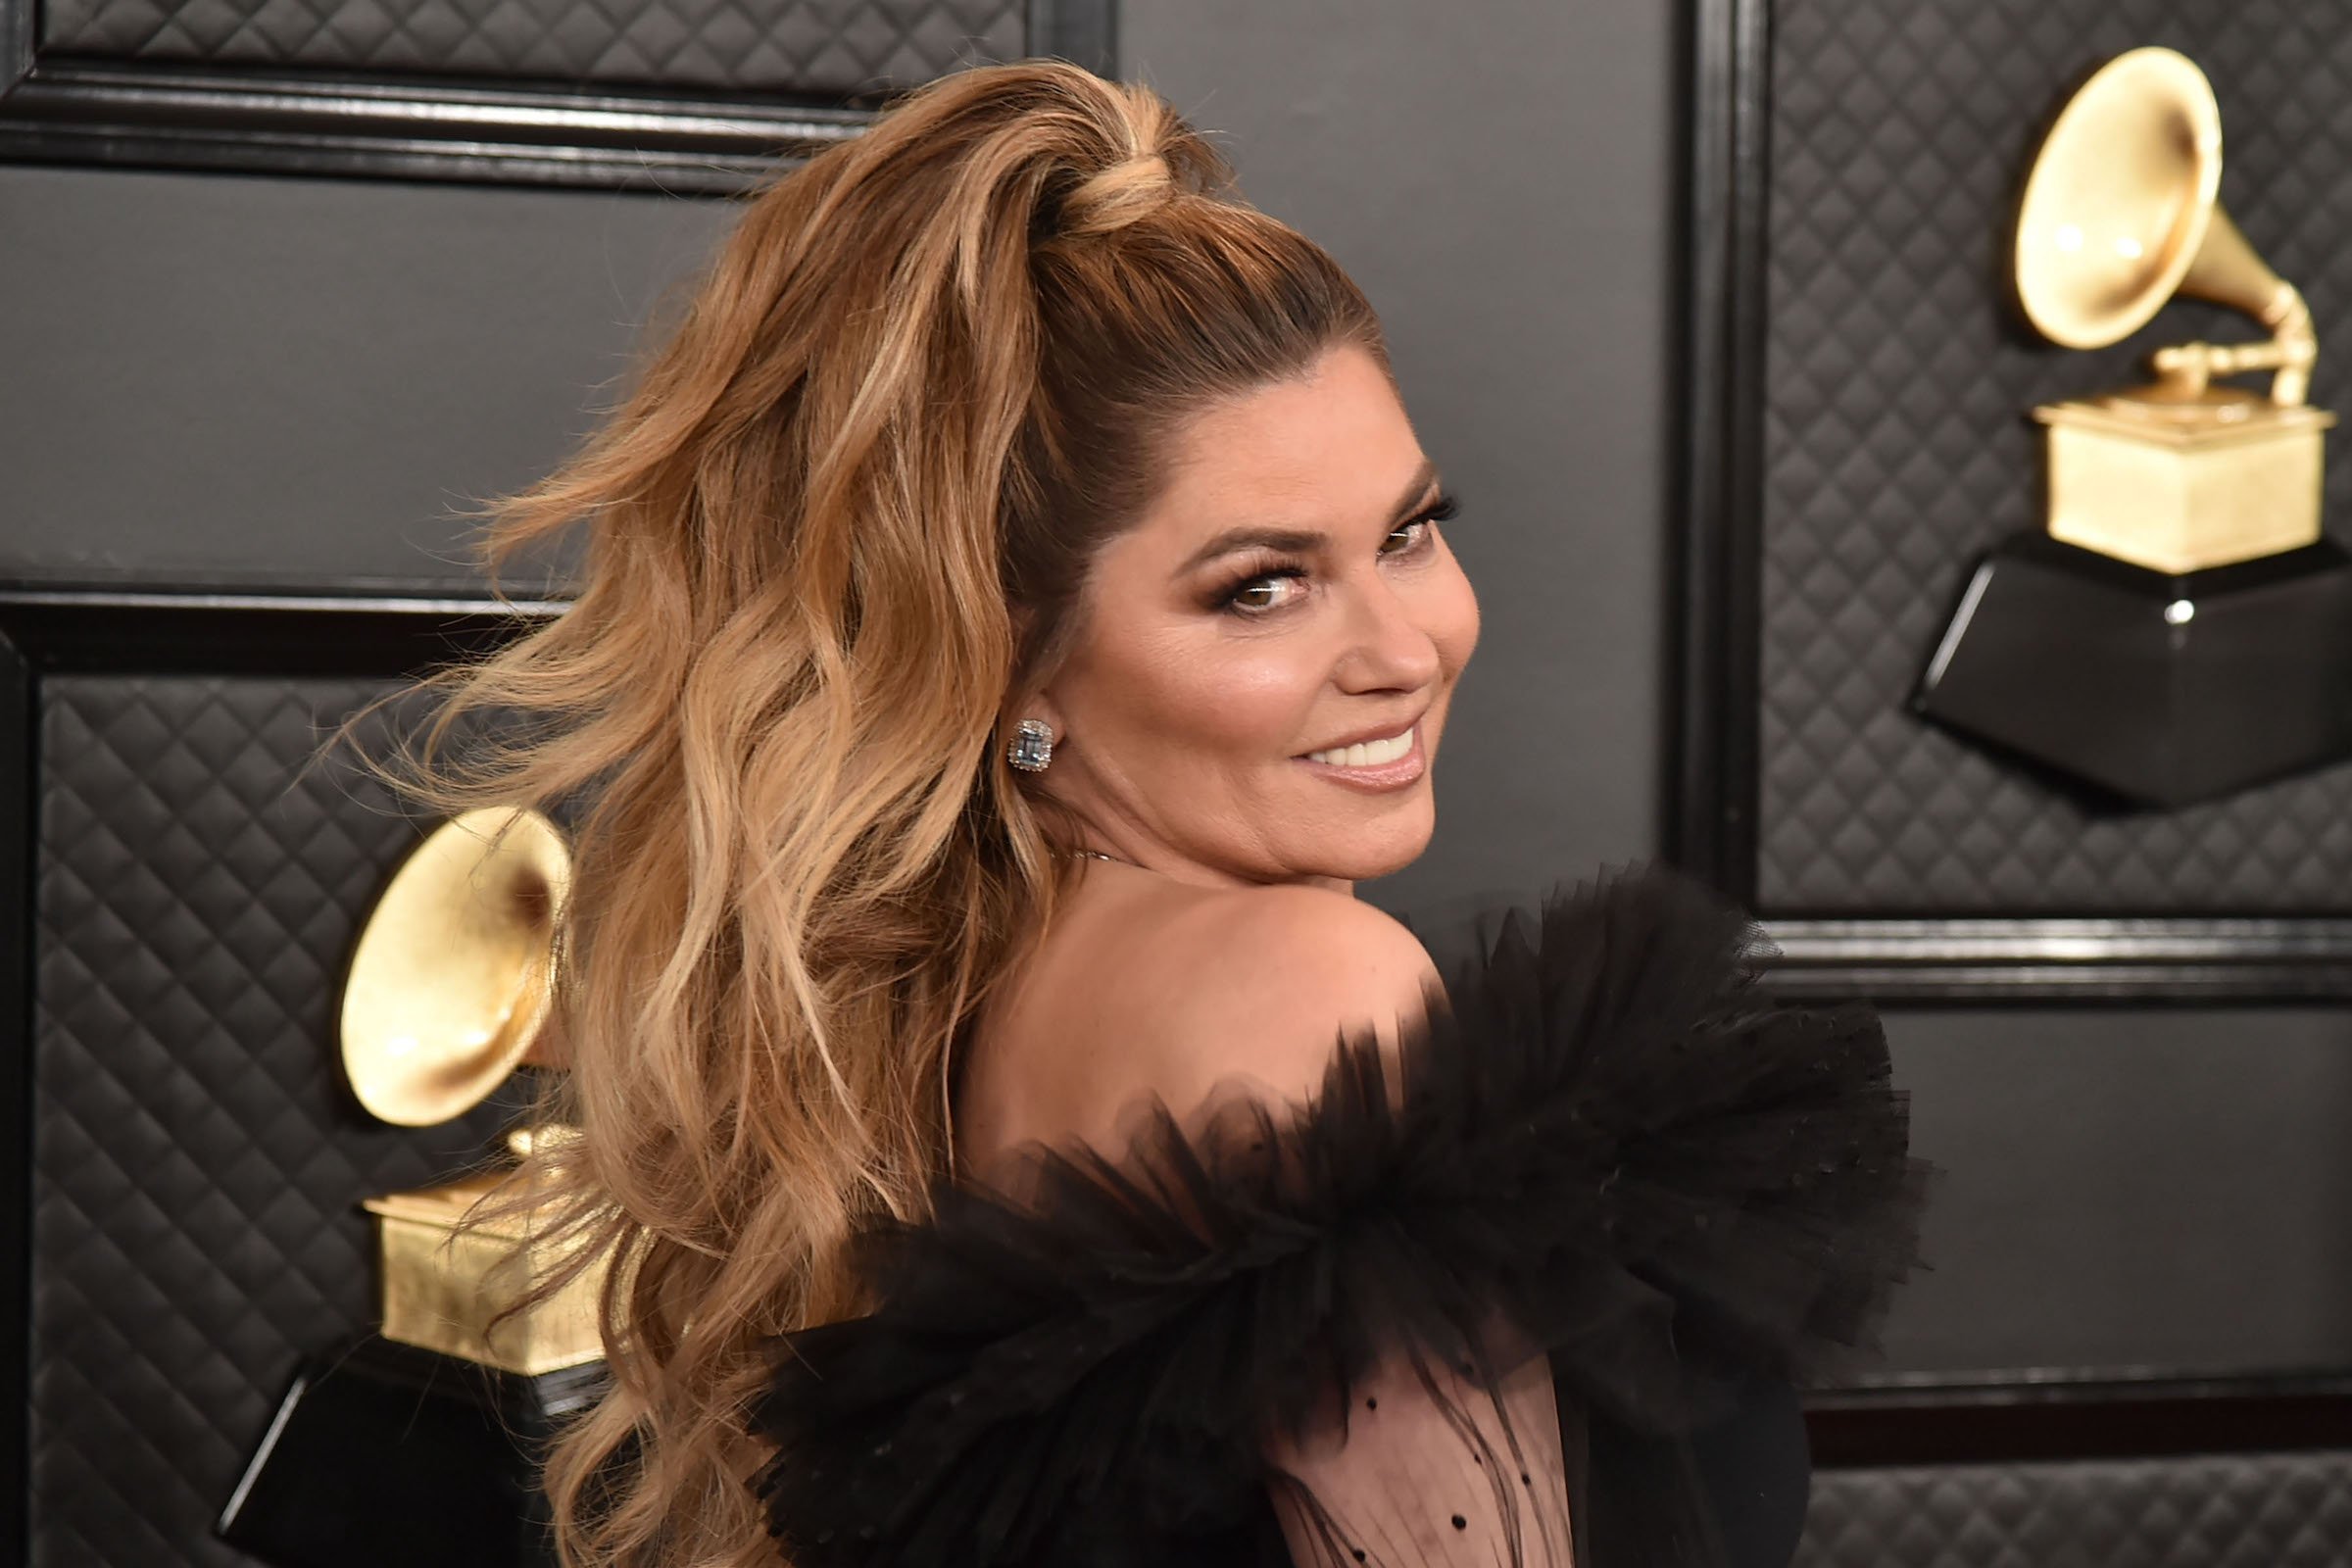 Shania Twain, who used to blowdry her hair with a vacuum cleaner, at the Grammy Awards